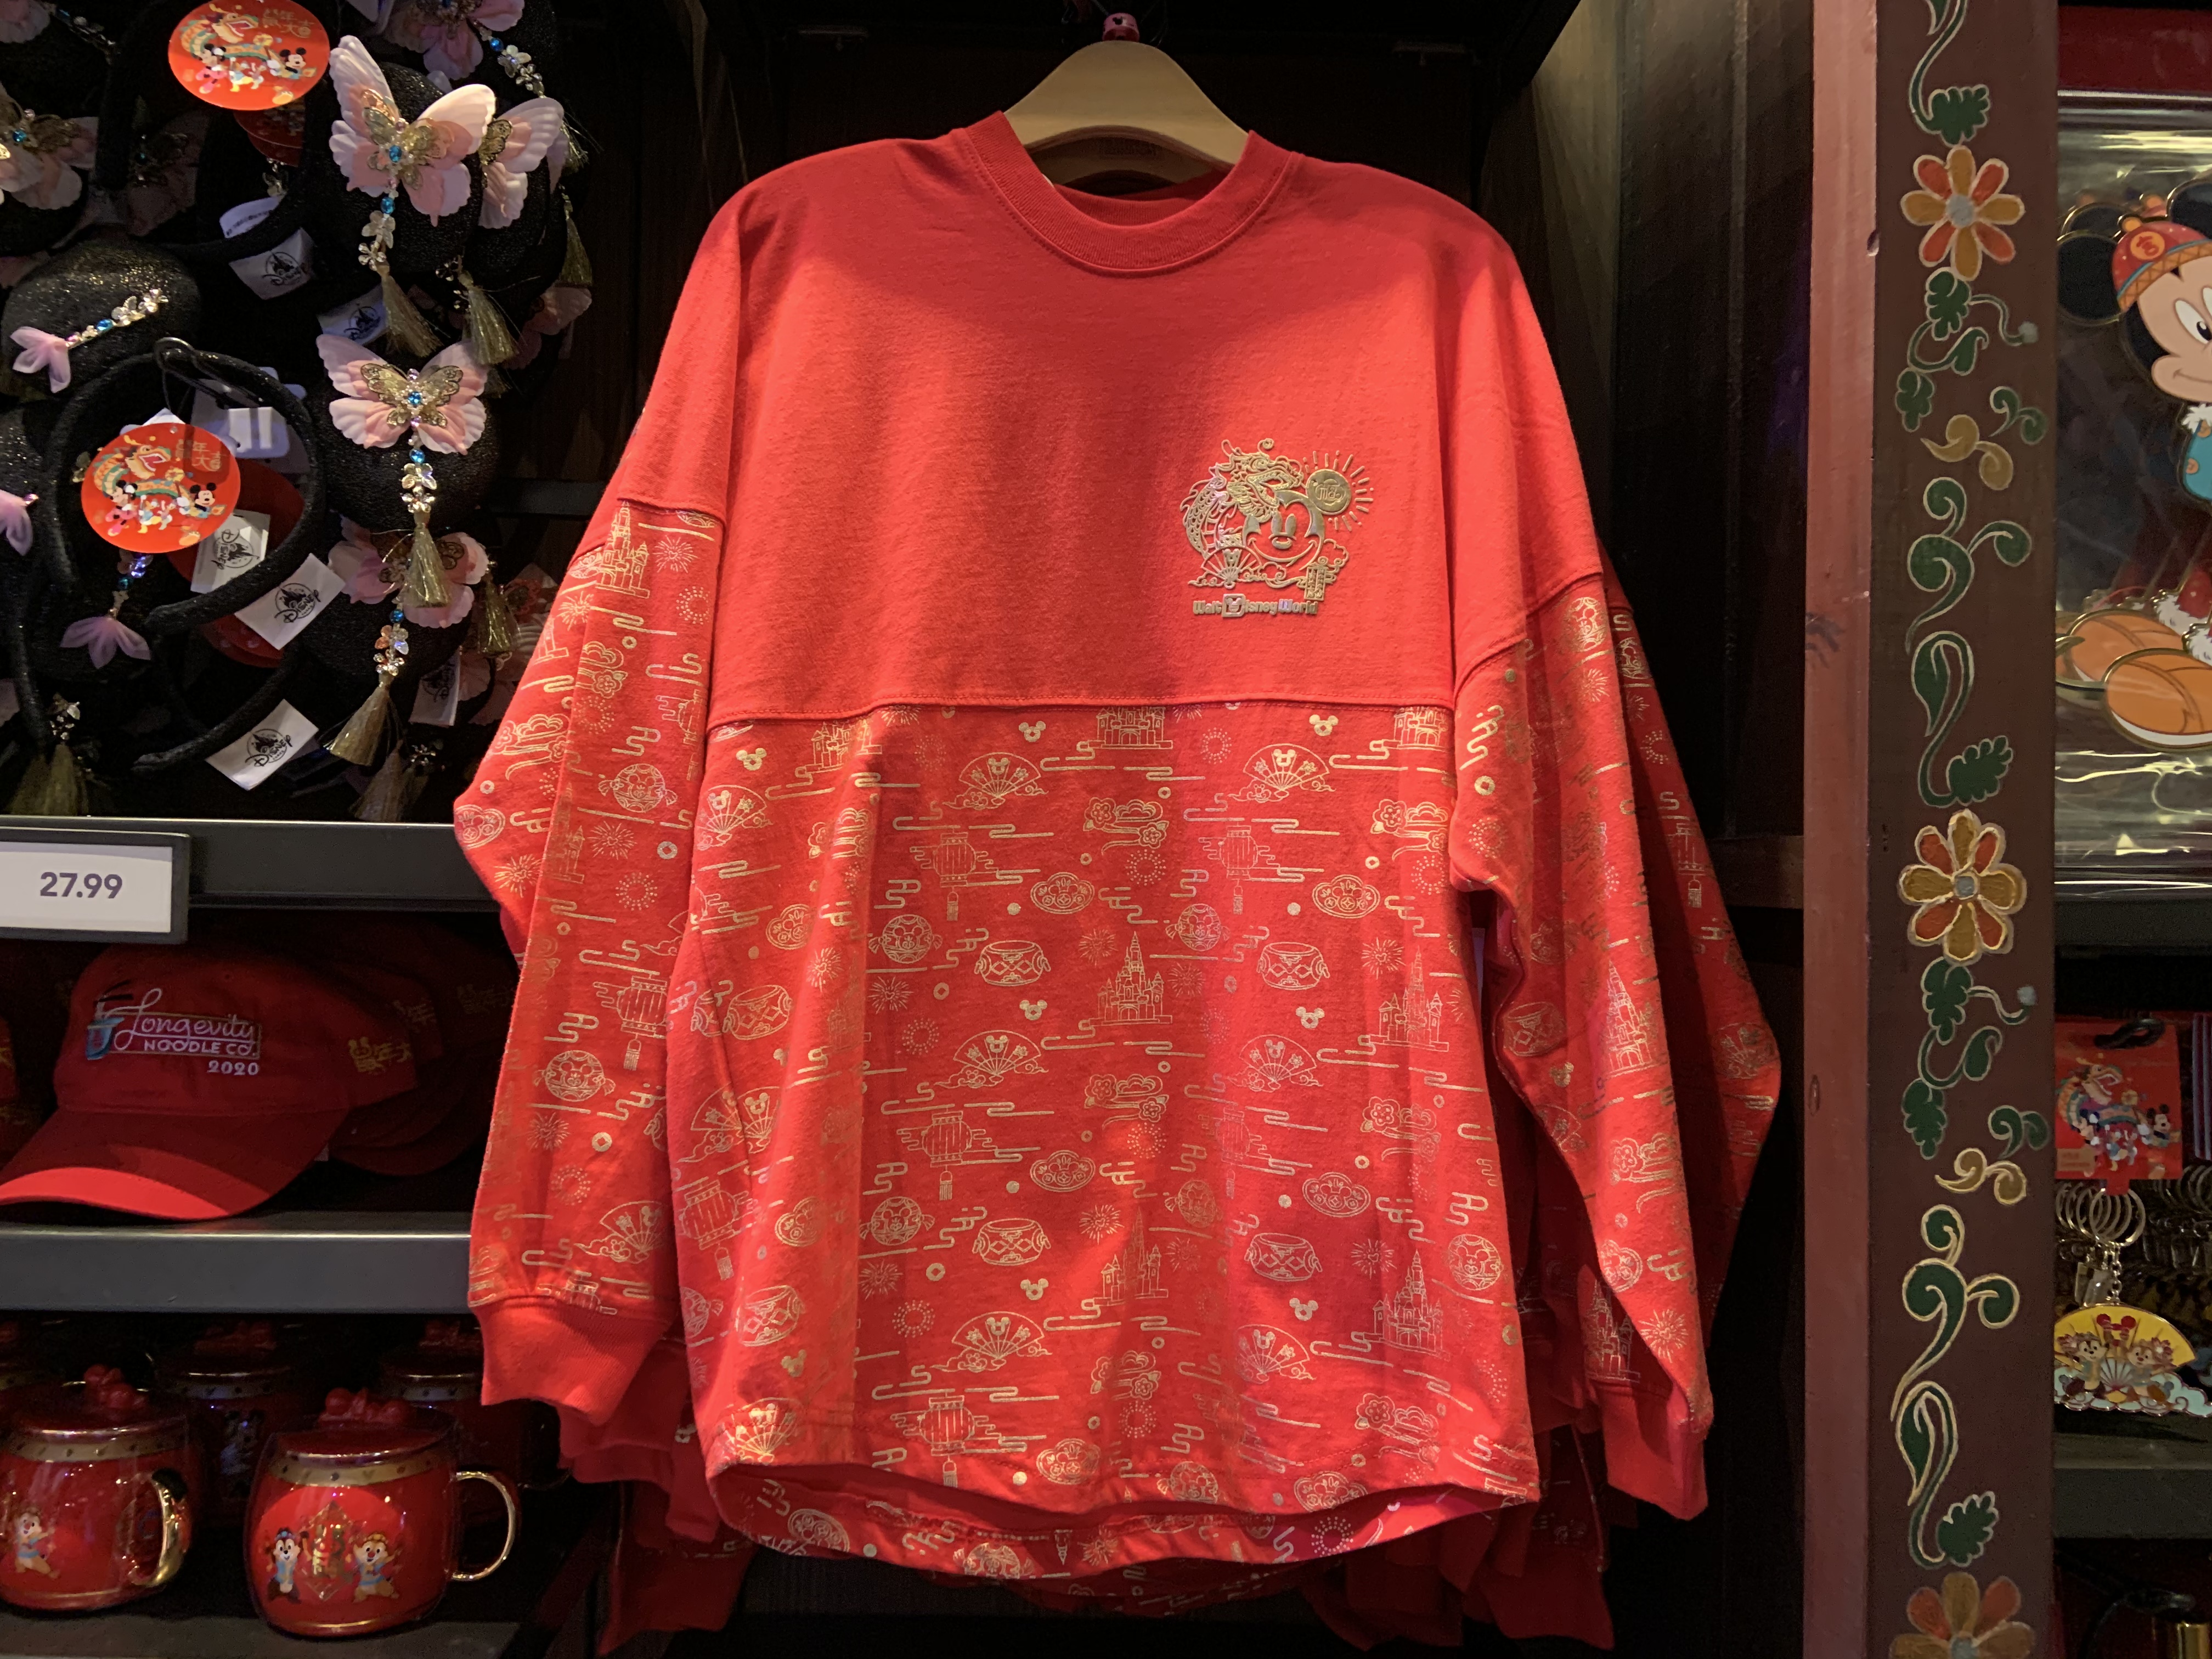 PHOTOS Lunar New Year Merchandise Celebrates the Year of the Mouse at